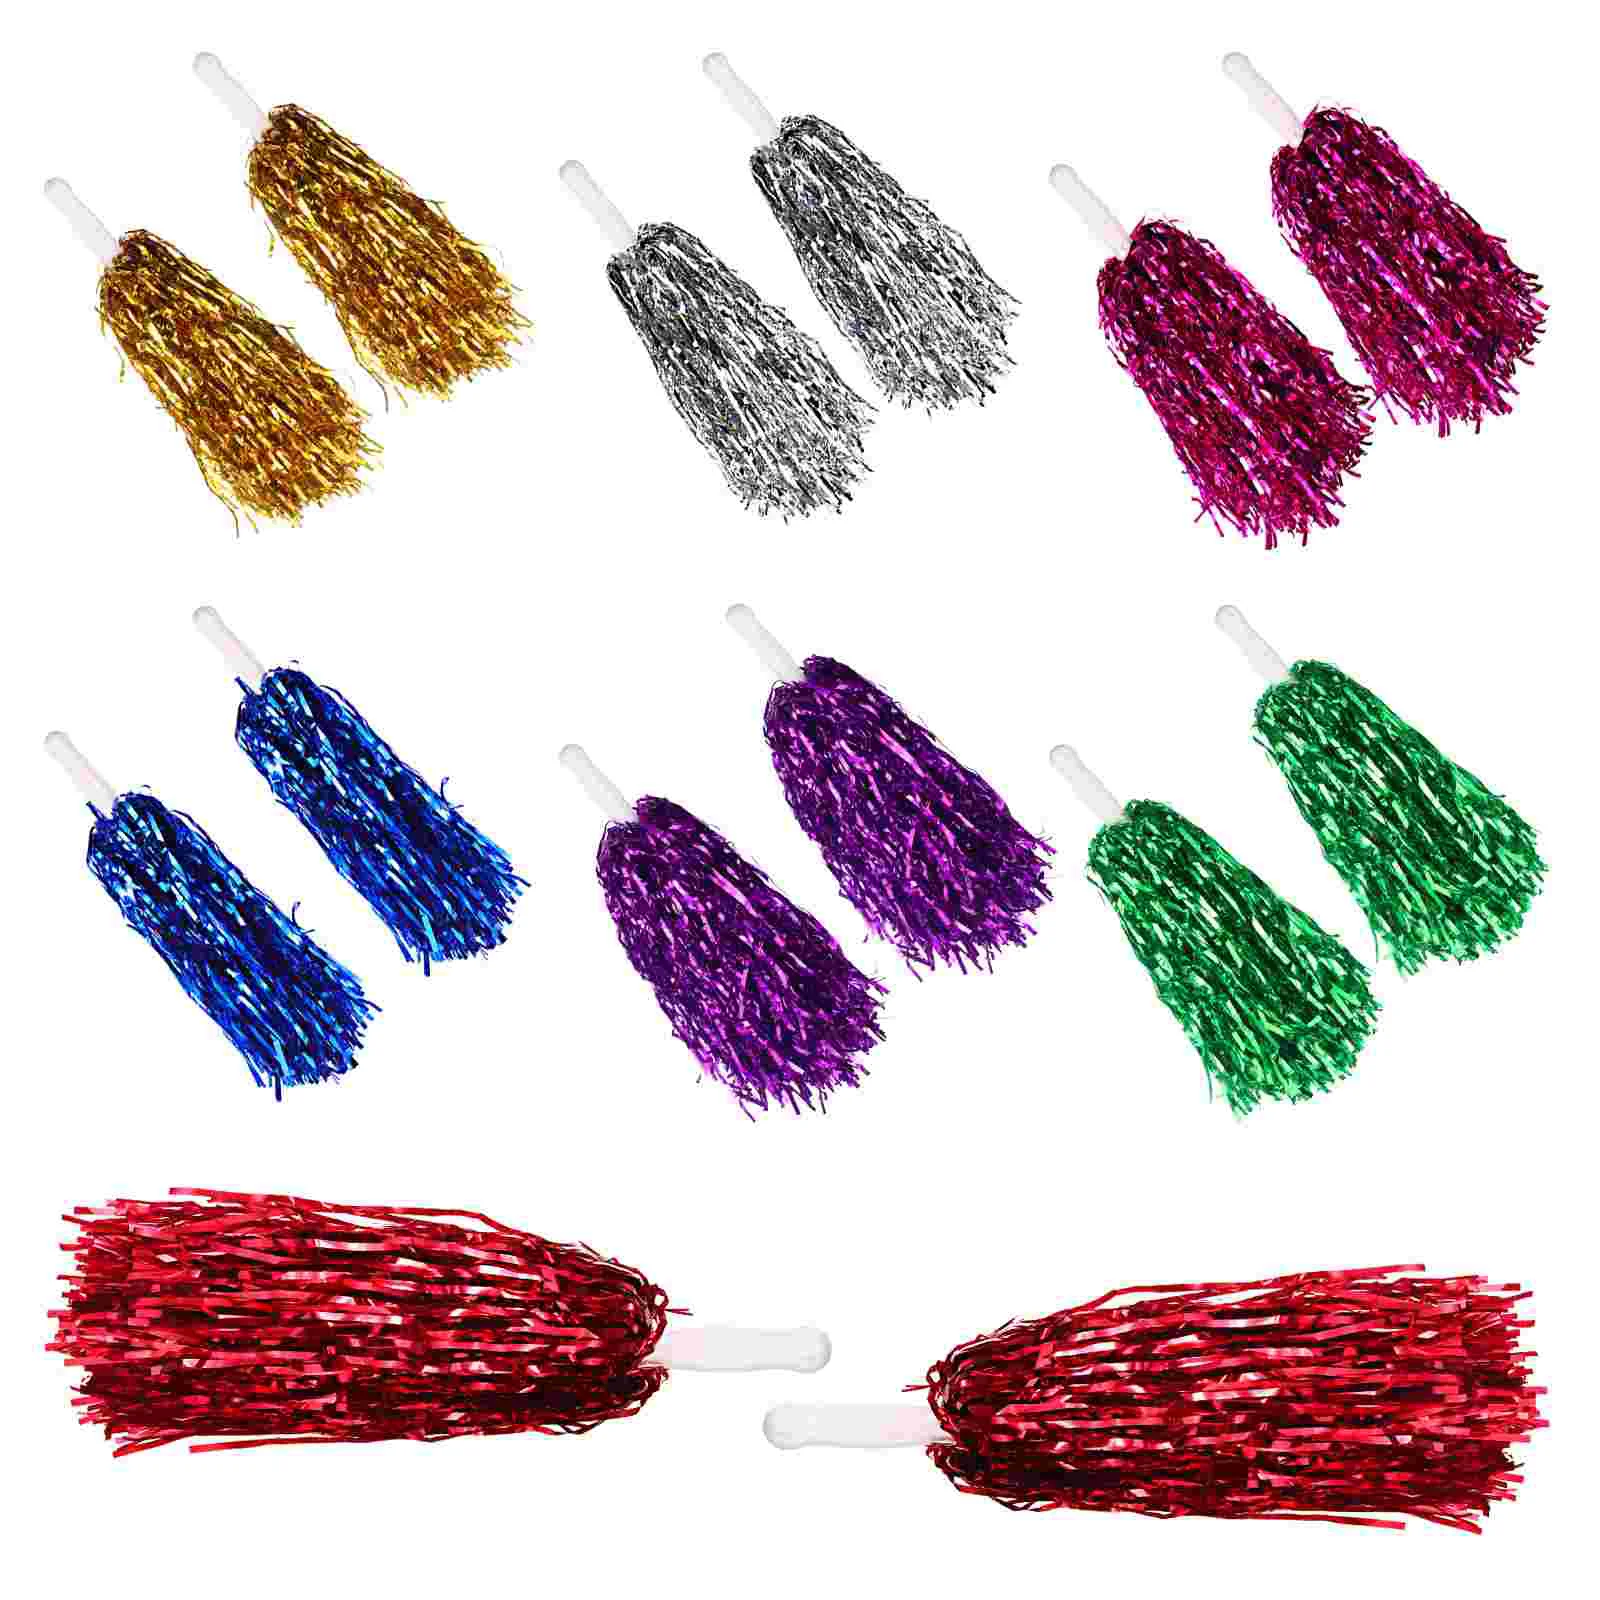 

NUOBESTY 14pcs Cheerleader Pom Poms Cheerleading Hand Flowers Metallic Foil Poms for Sports Events Team Players Parties